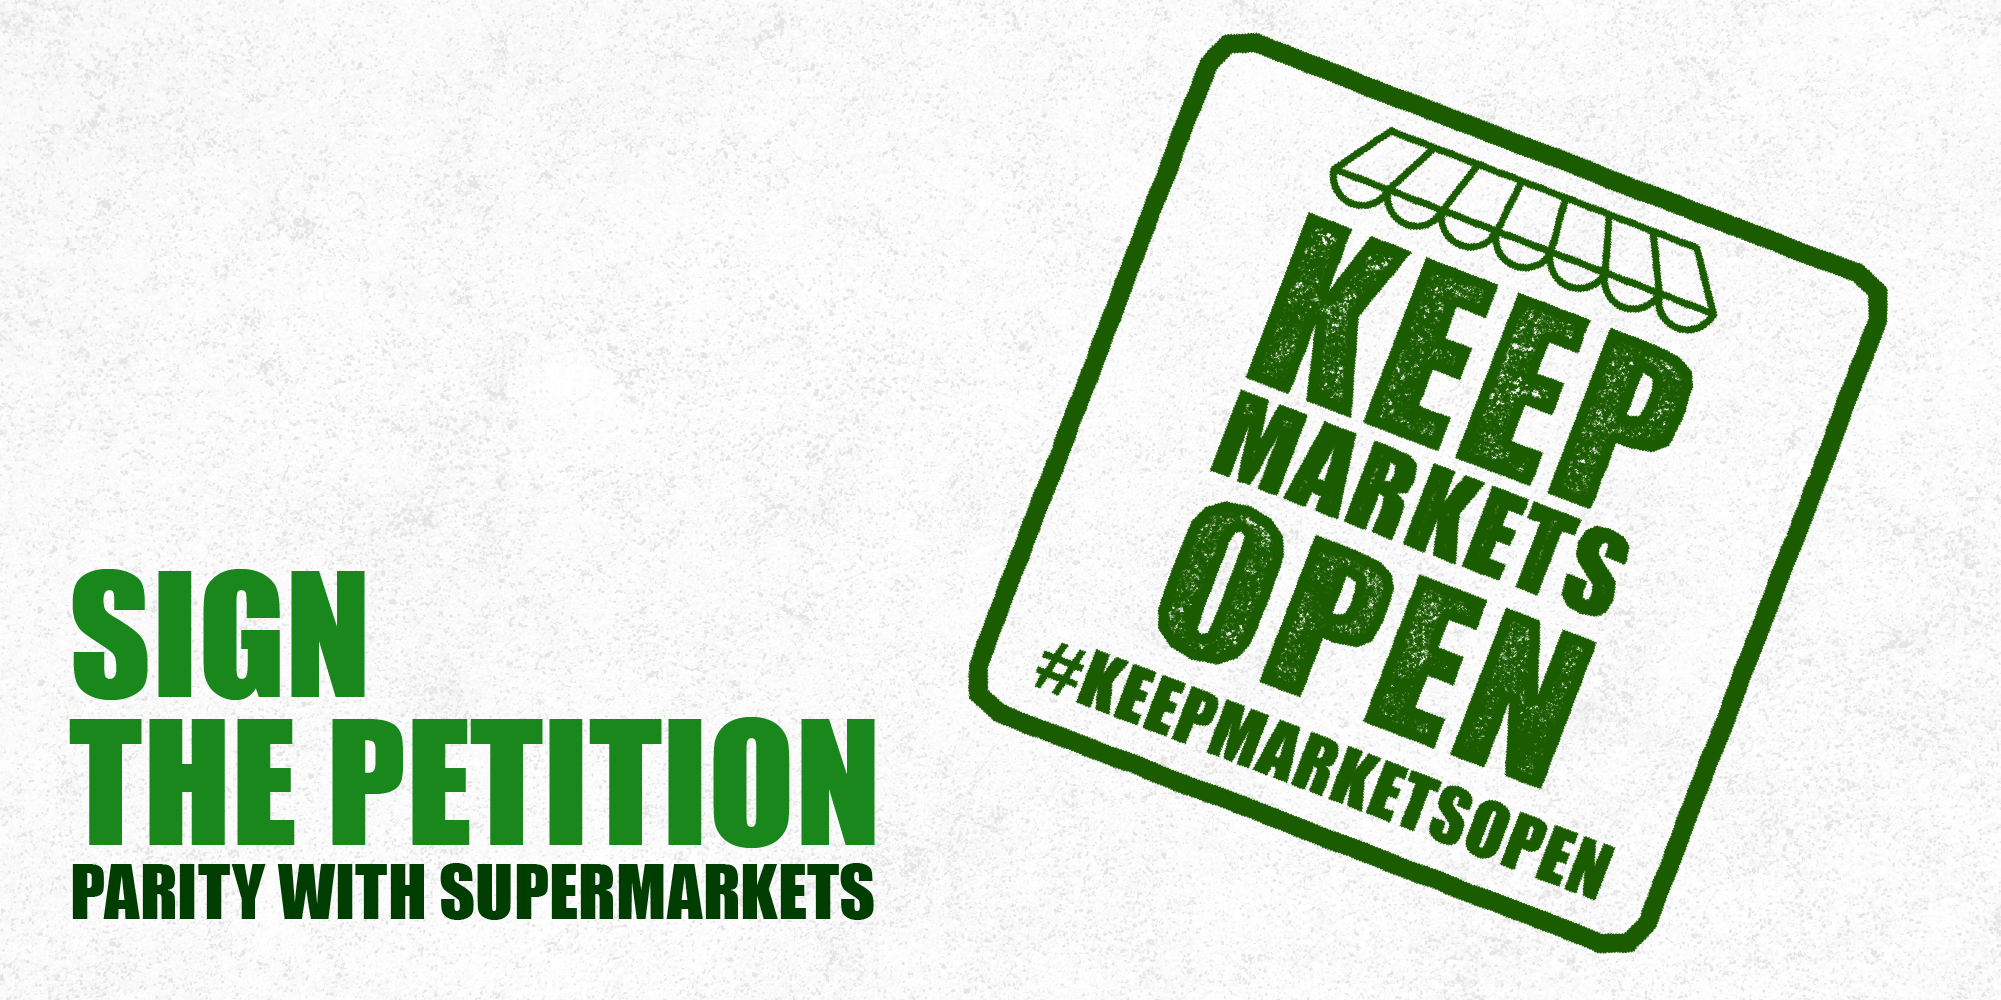 Campaigning to keep markets open and support traders and operators